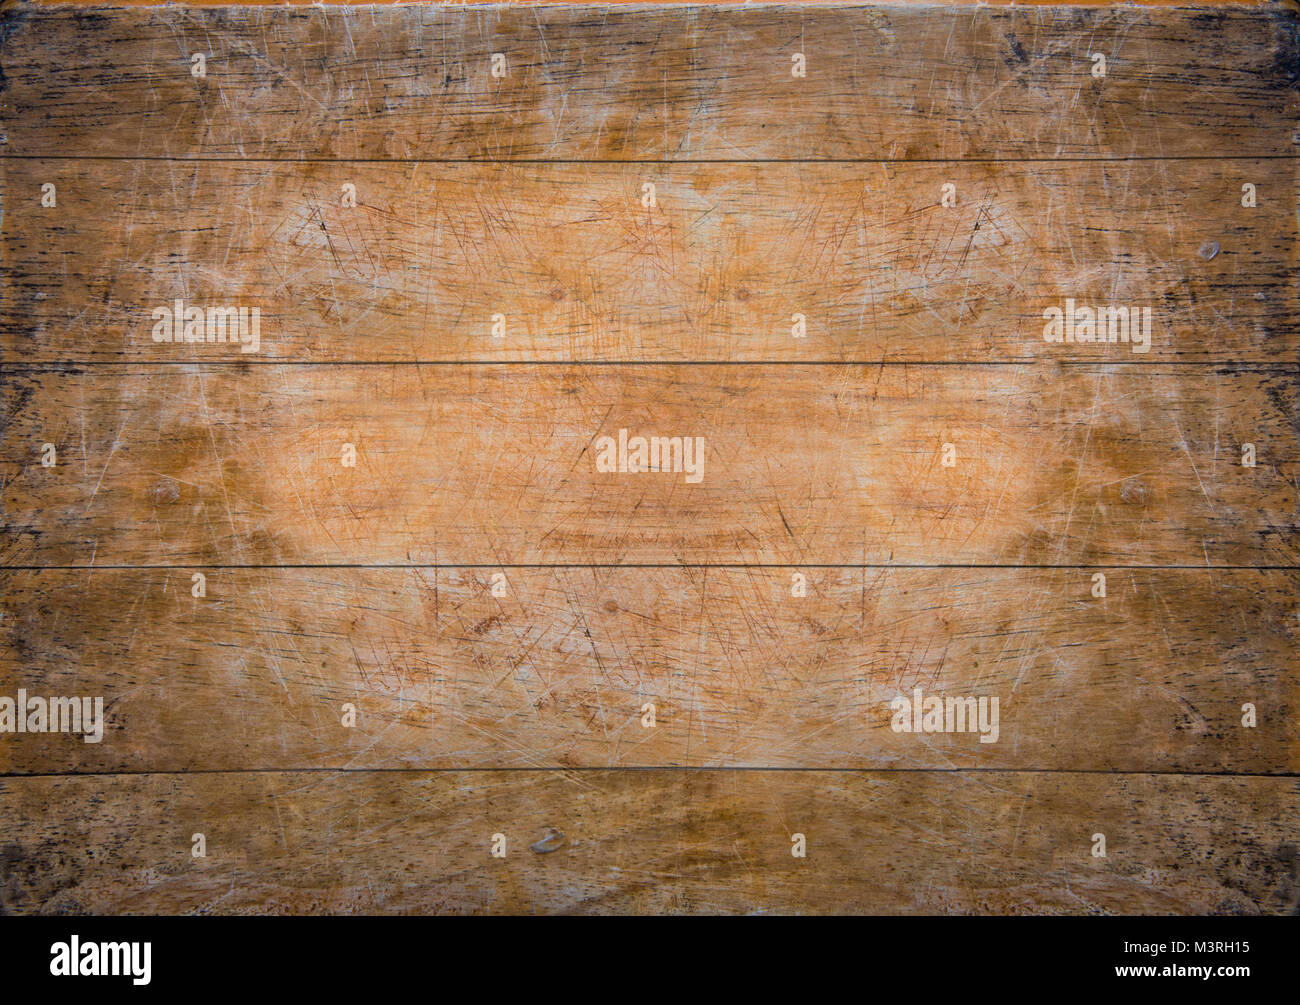 Grunge wood vintage texture background with vignette, Grunge wood texture background is popular vintage background for graphic designer. Wood texture  Stock Photo